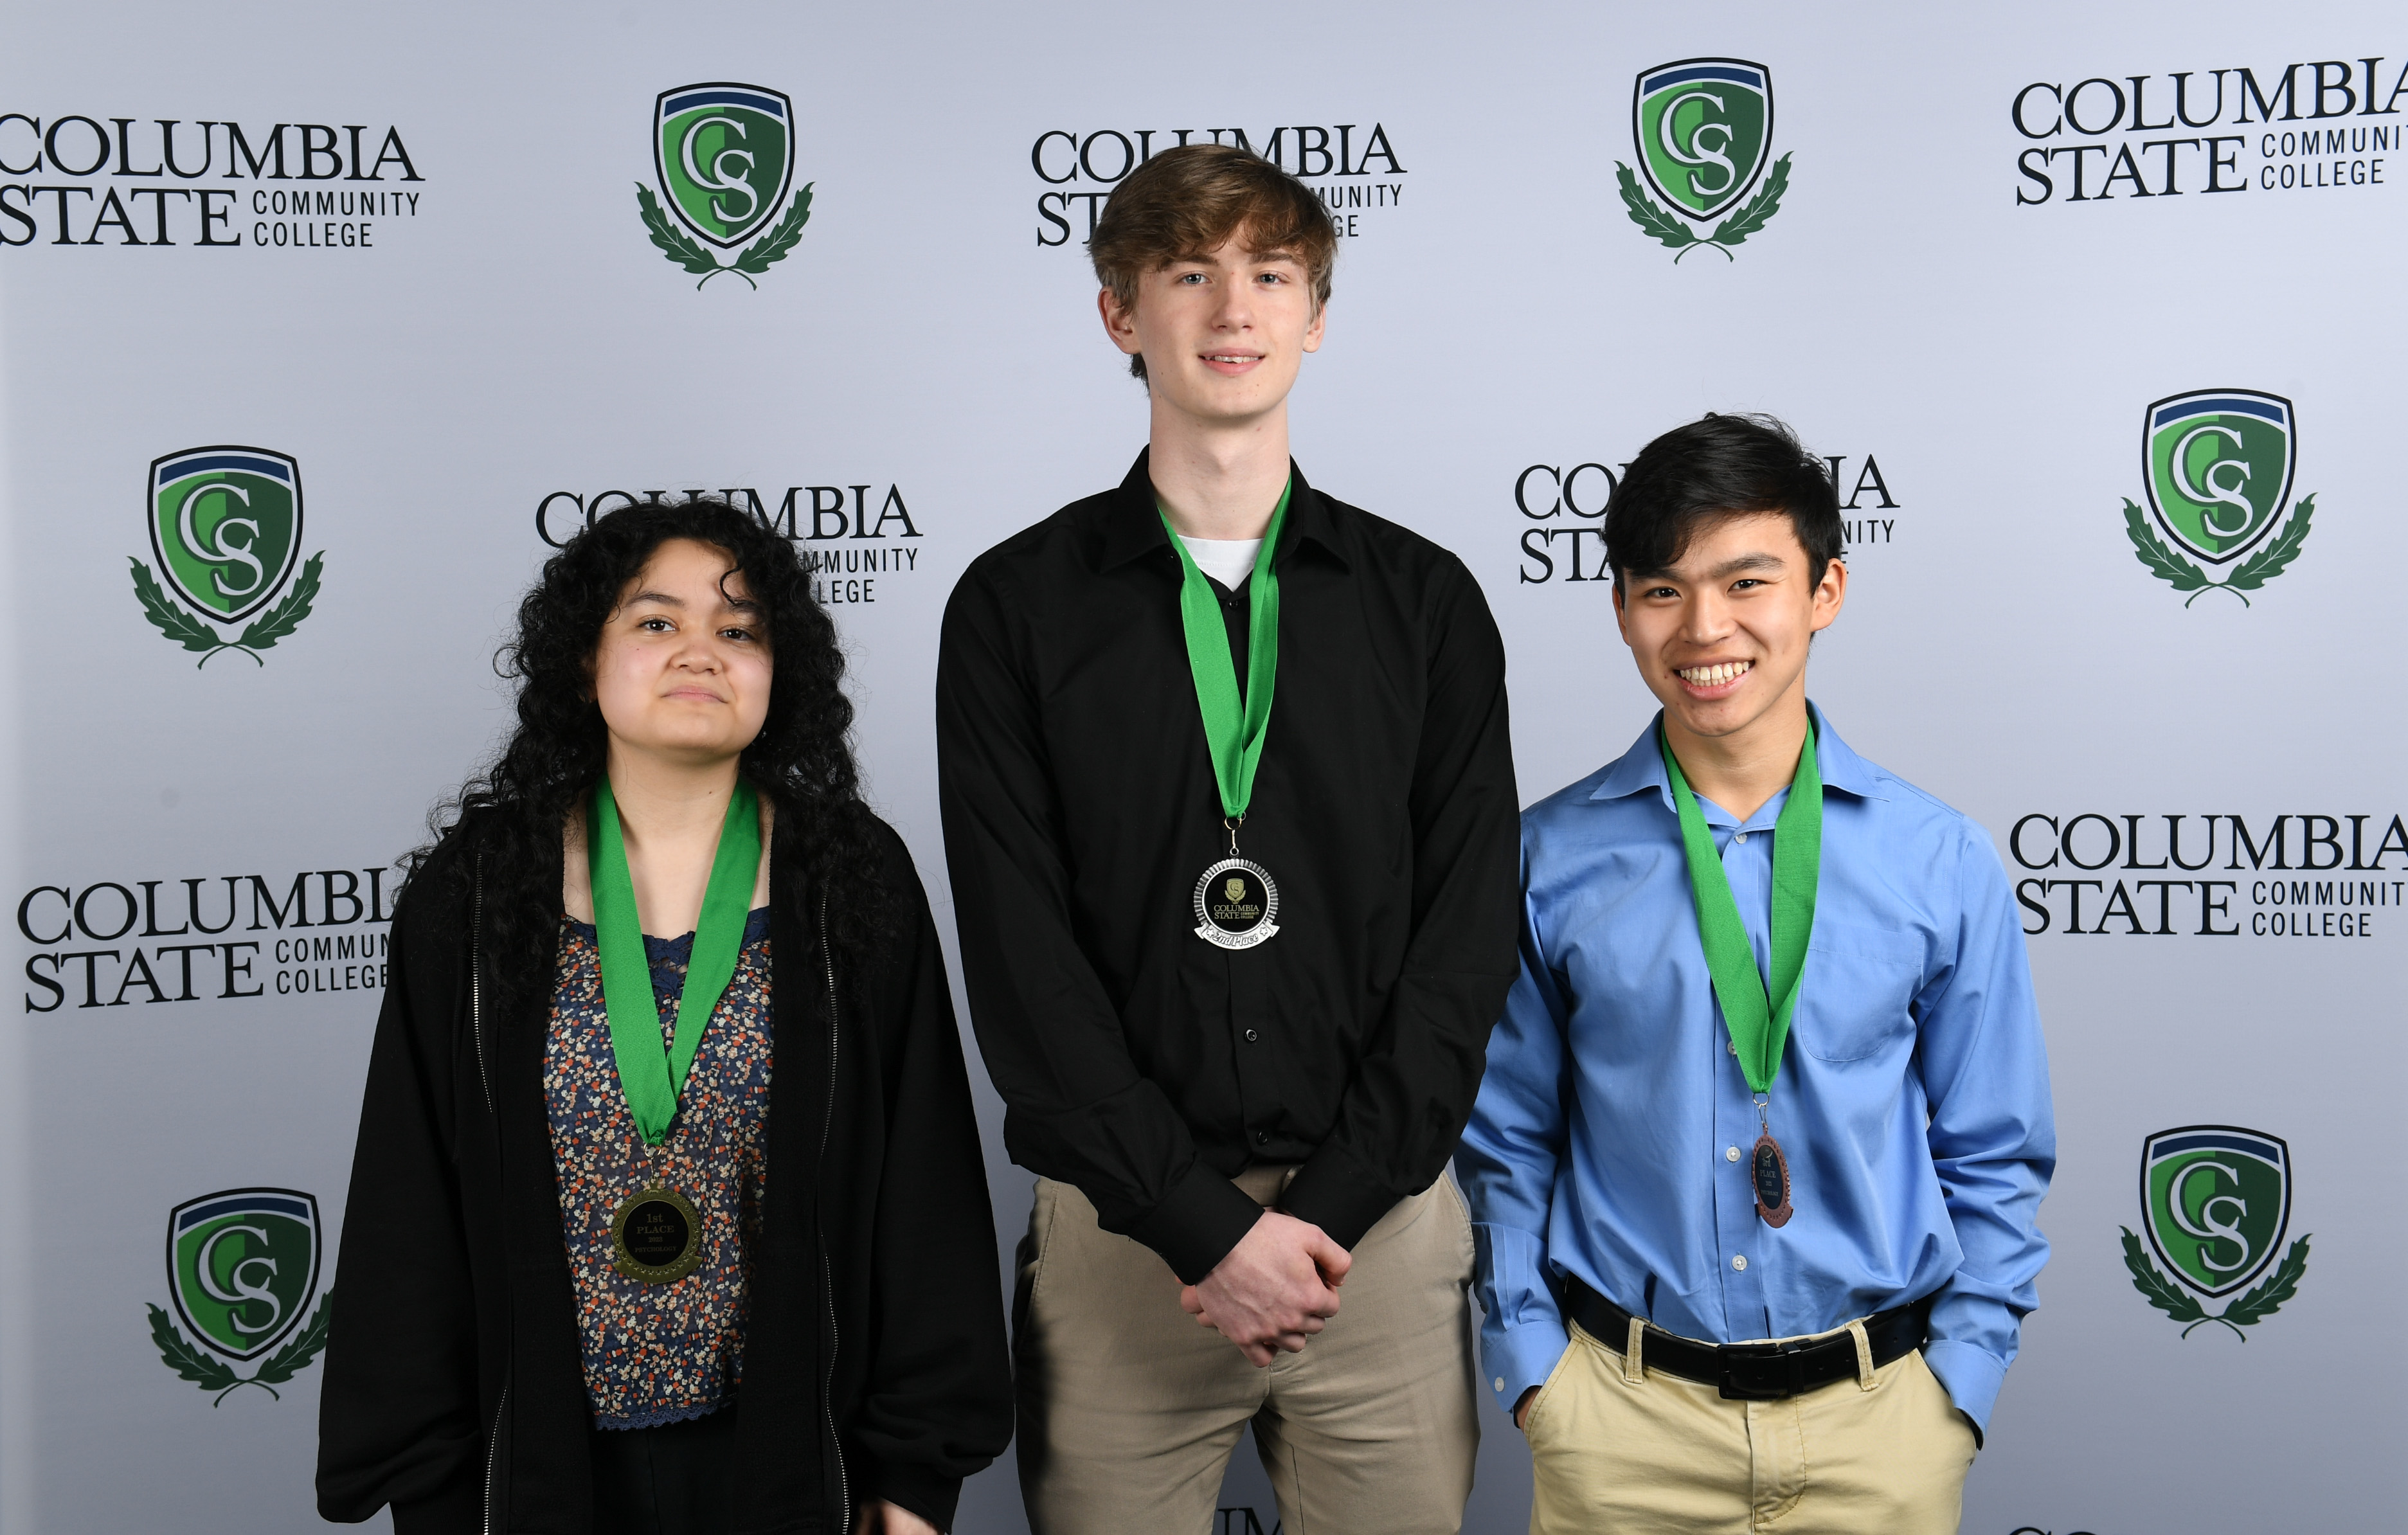 Psychology Winners (left to right): First place winner, Francia Zoe Galeas of Summit High School; second place winner, Aaron McKey of Loretto High School; and third place winner, Max Bottoms of Loretto High School.